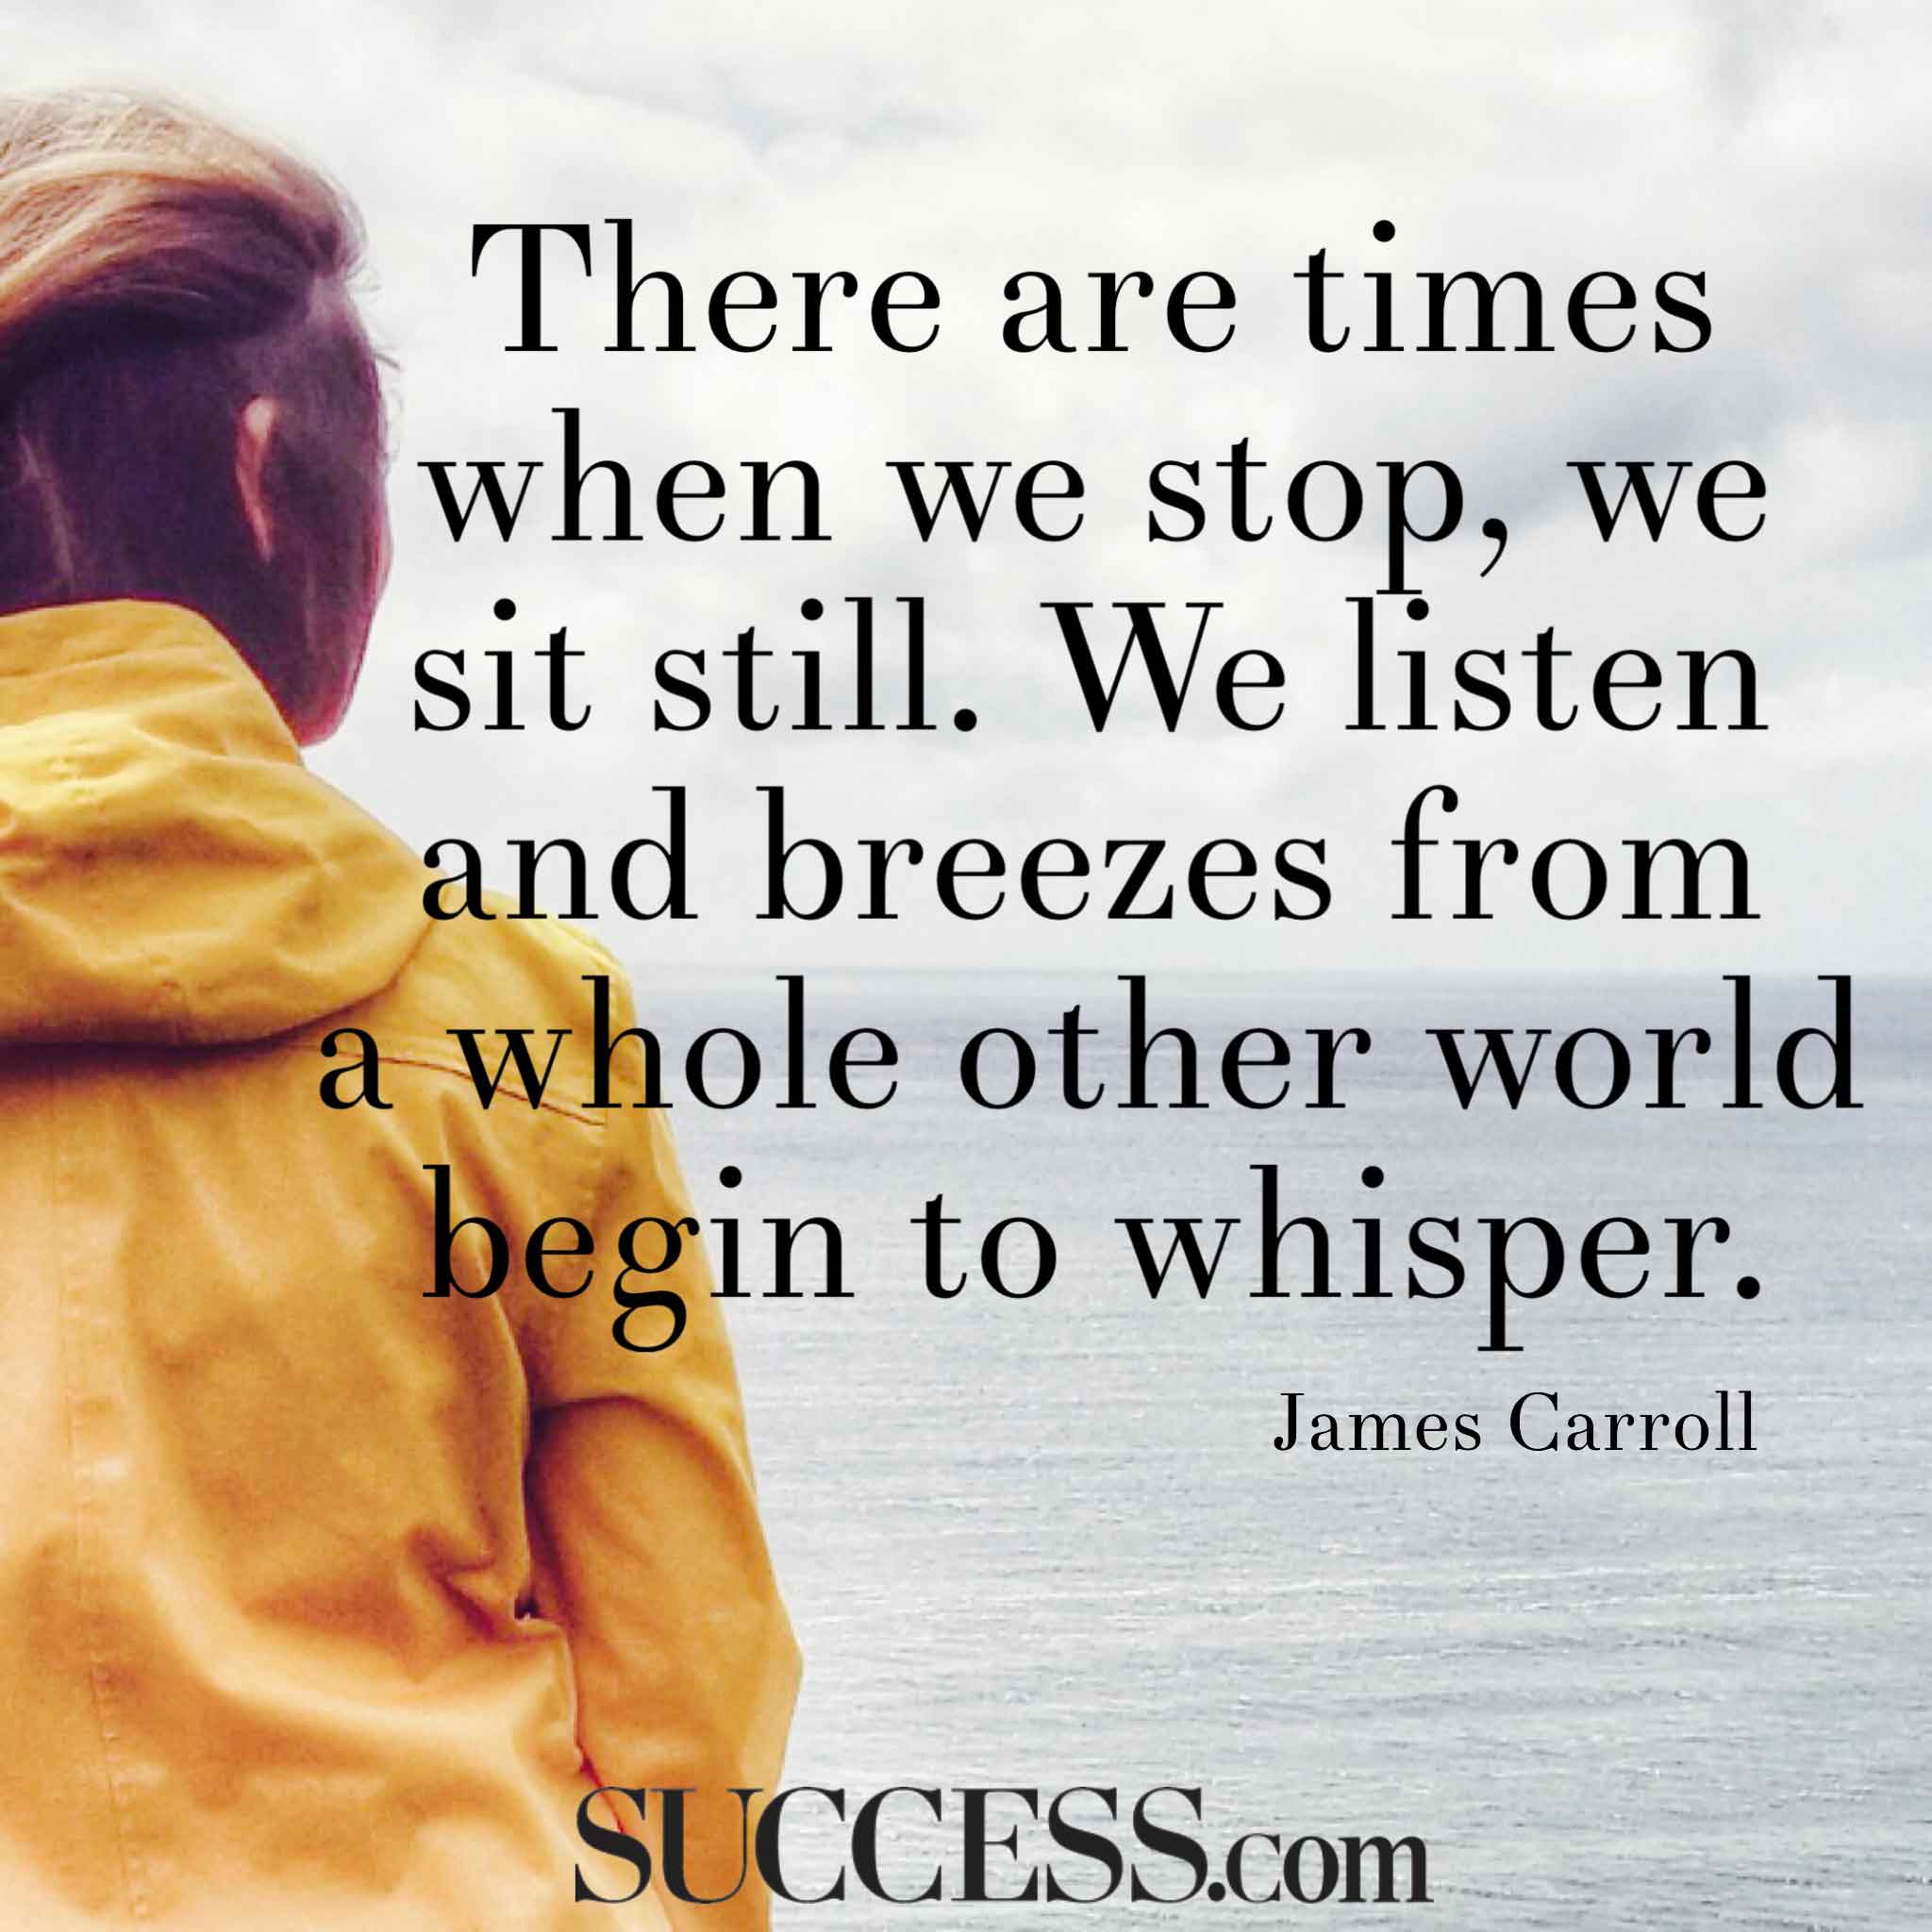 19 Calming Quotes to Help You Stress Less | SUCCESS